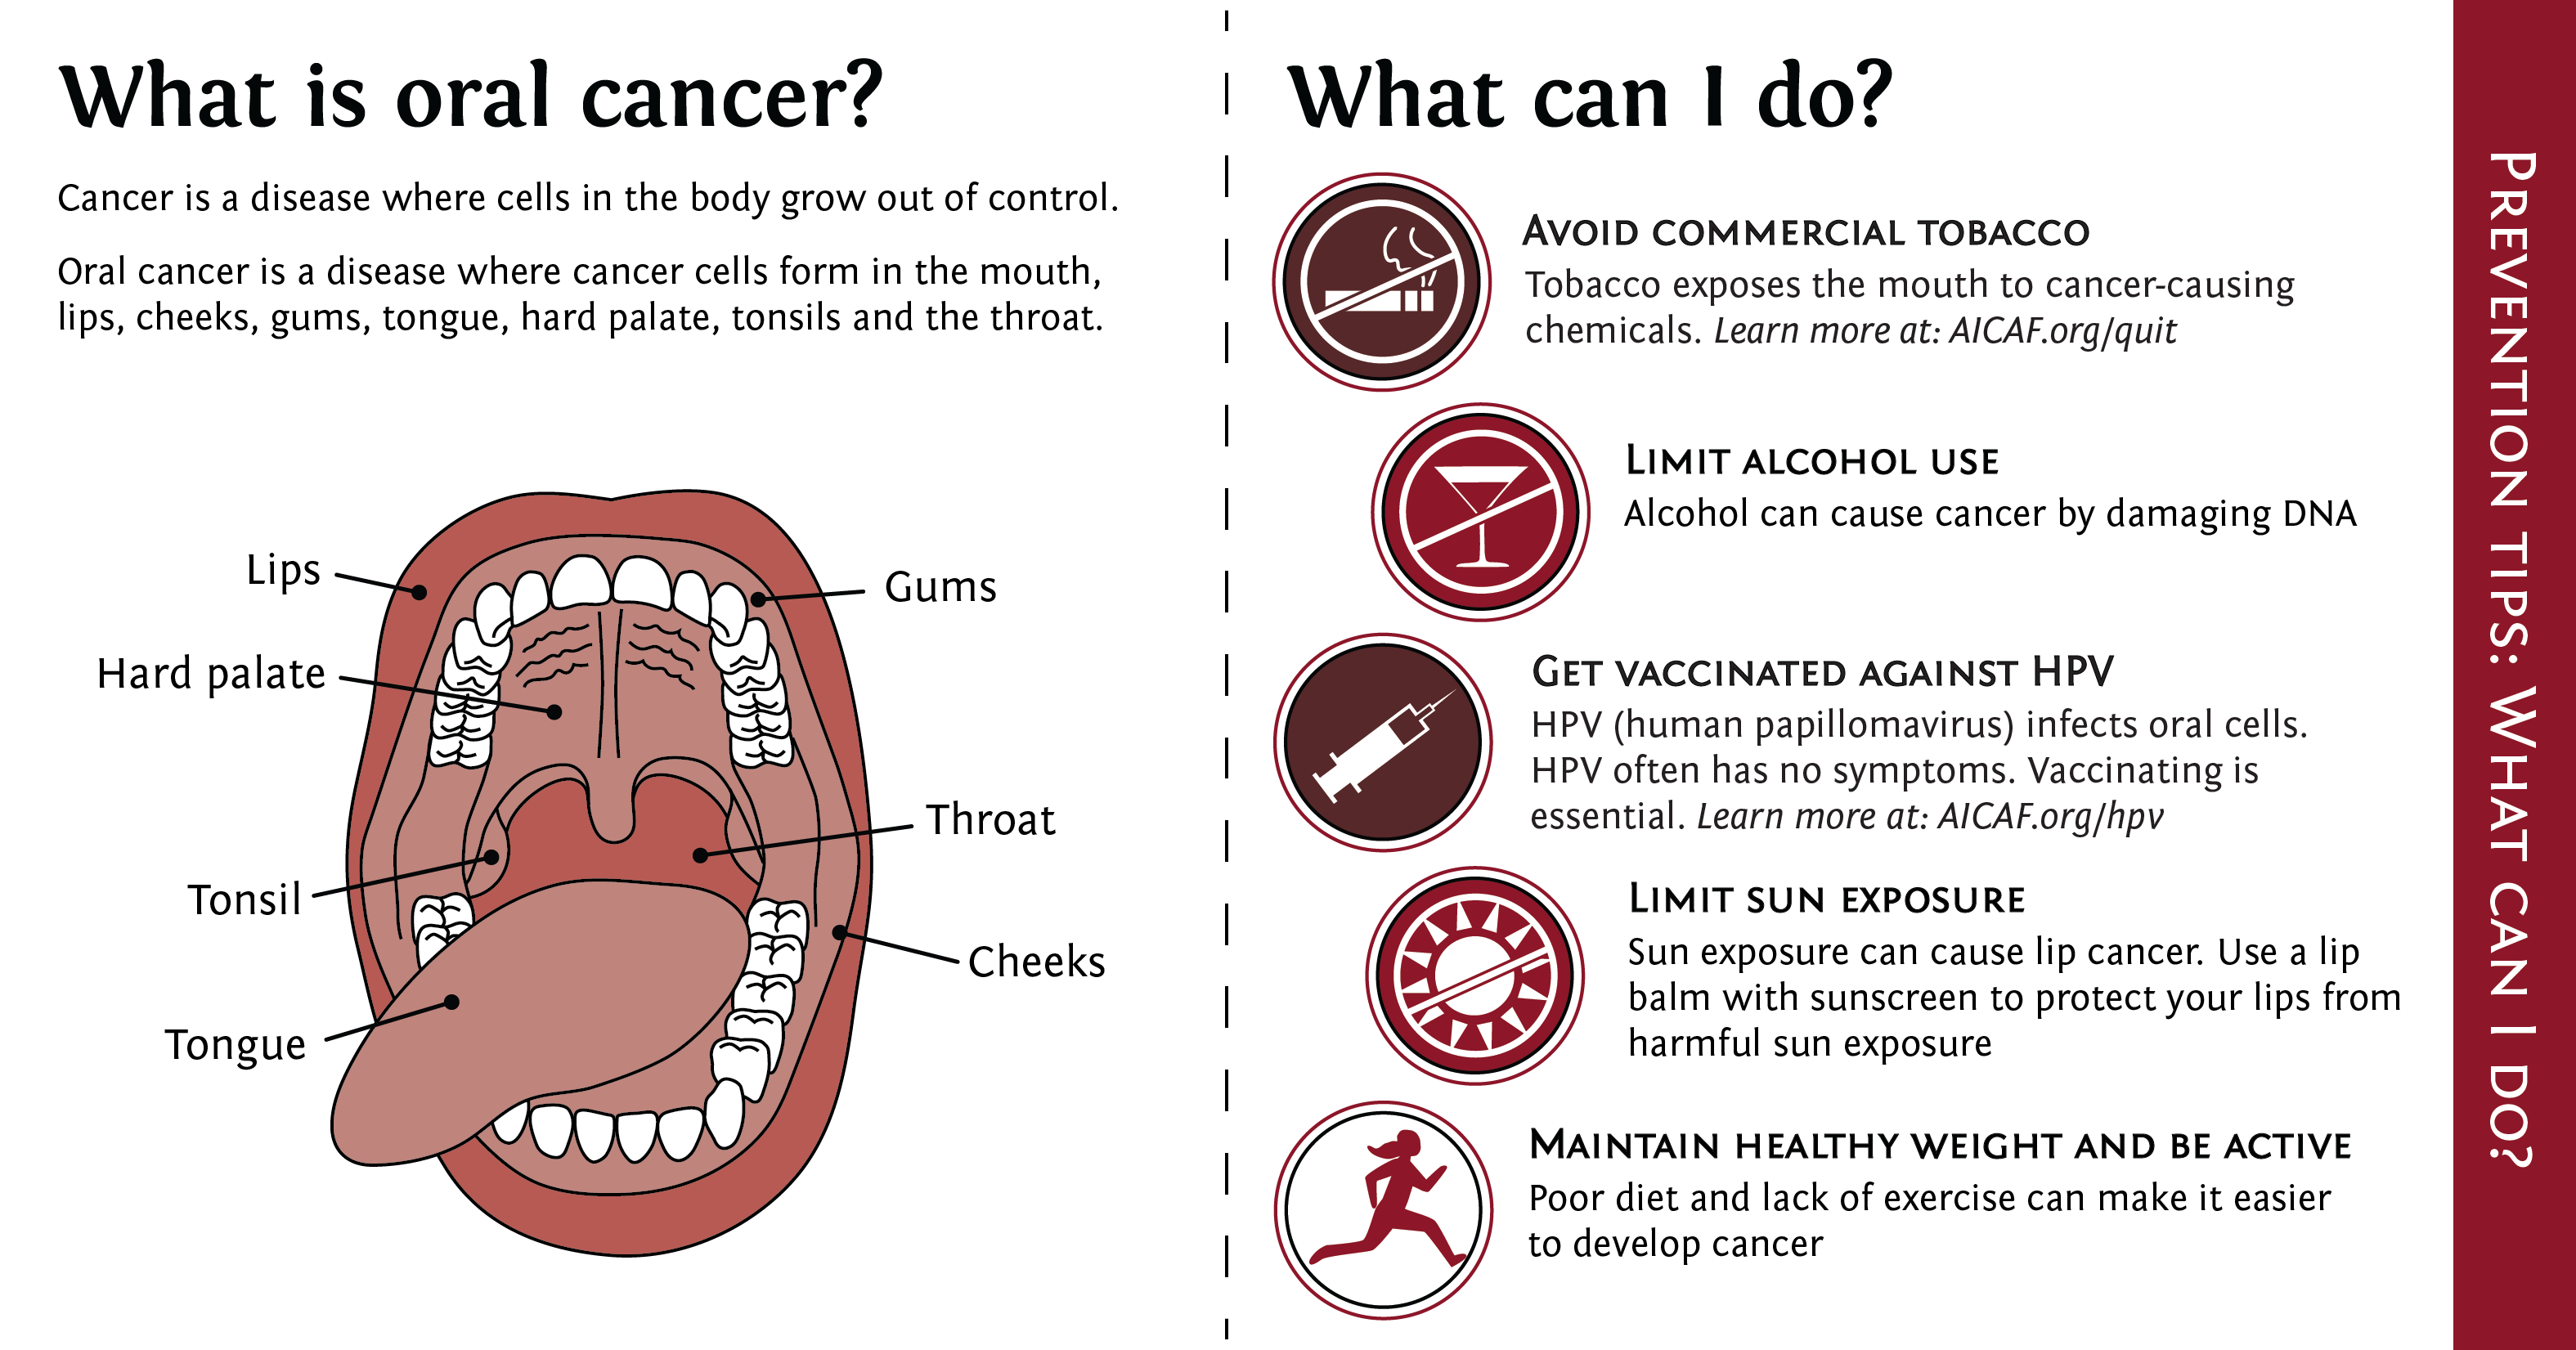 Common Oral Cancer Signs Symptoms And Ways To Prevent It